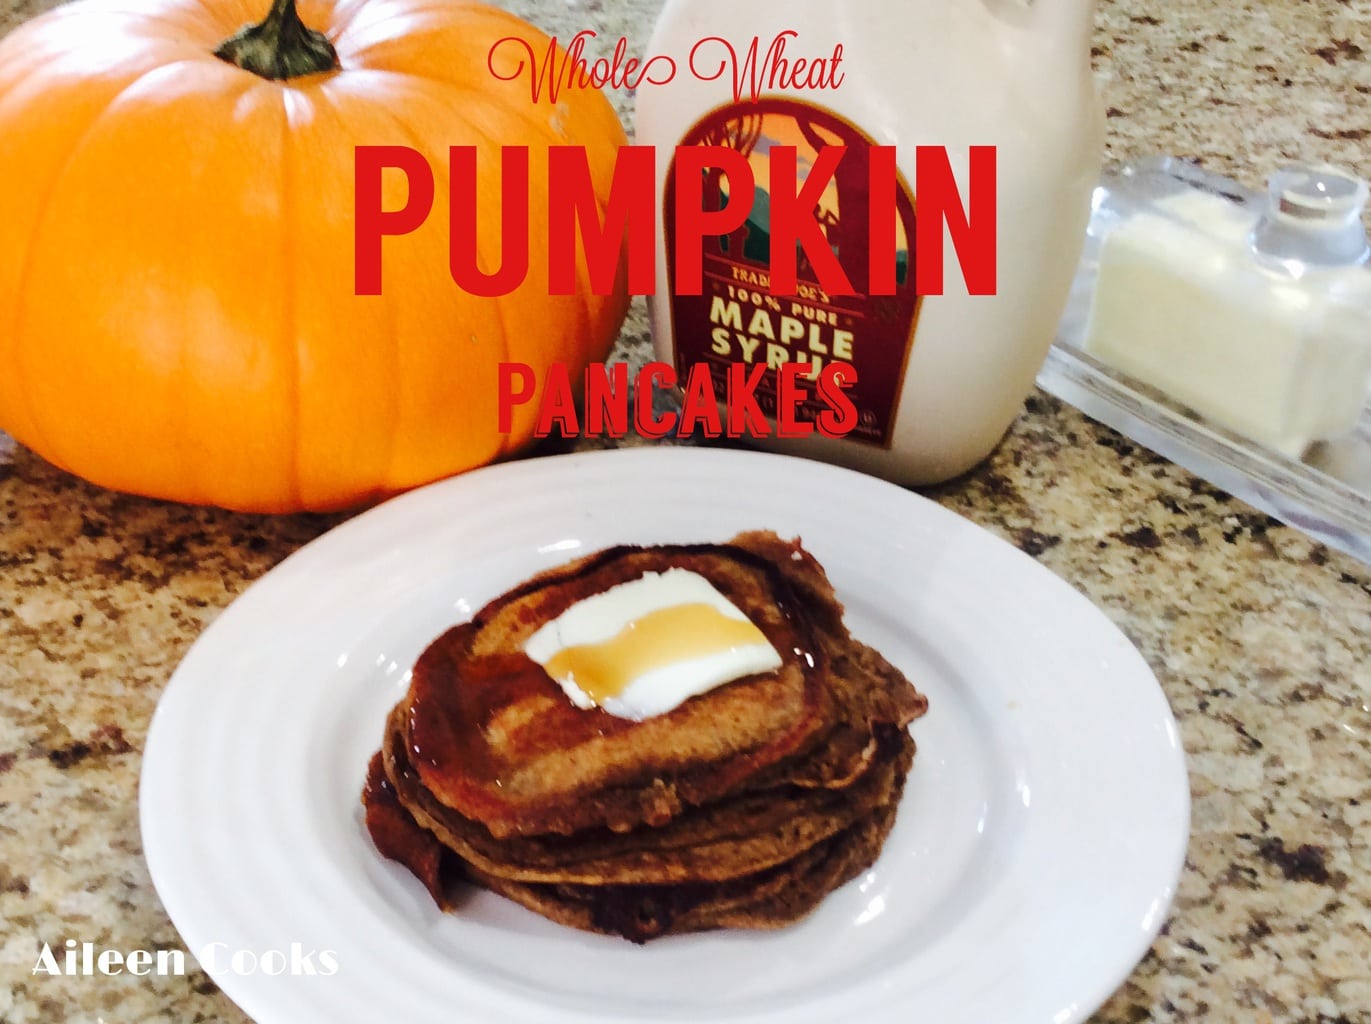 A stack of whole wheat pumpkin pancakes next to a pumpkin, bottle of maple syrup, and butter dish.